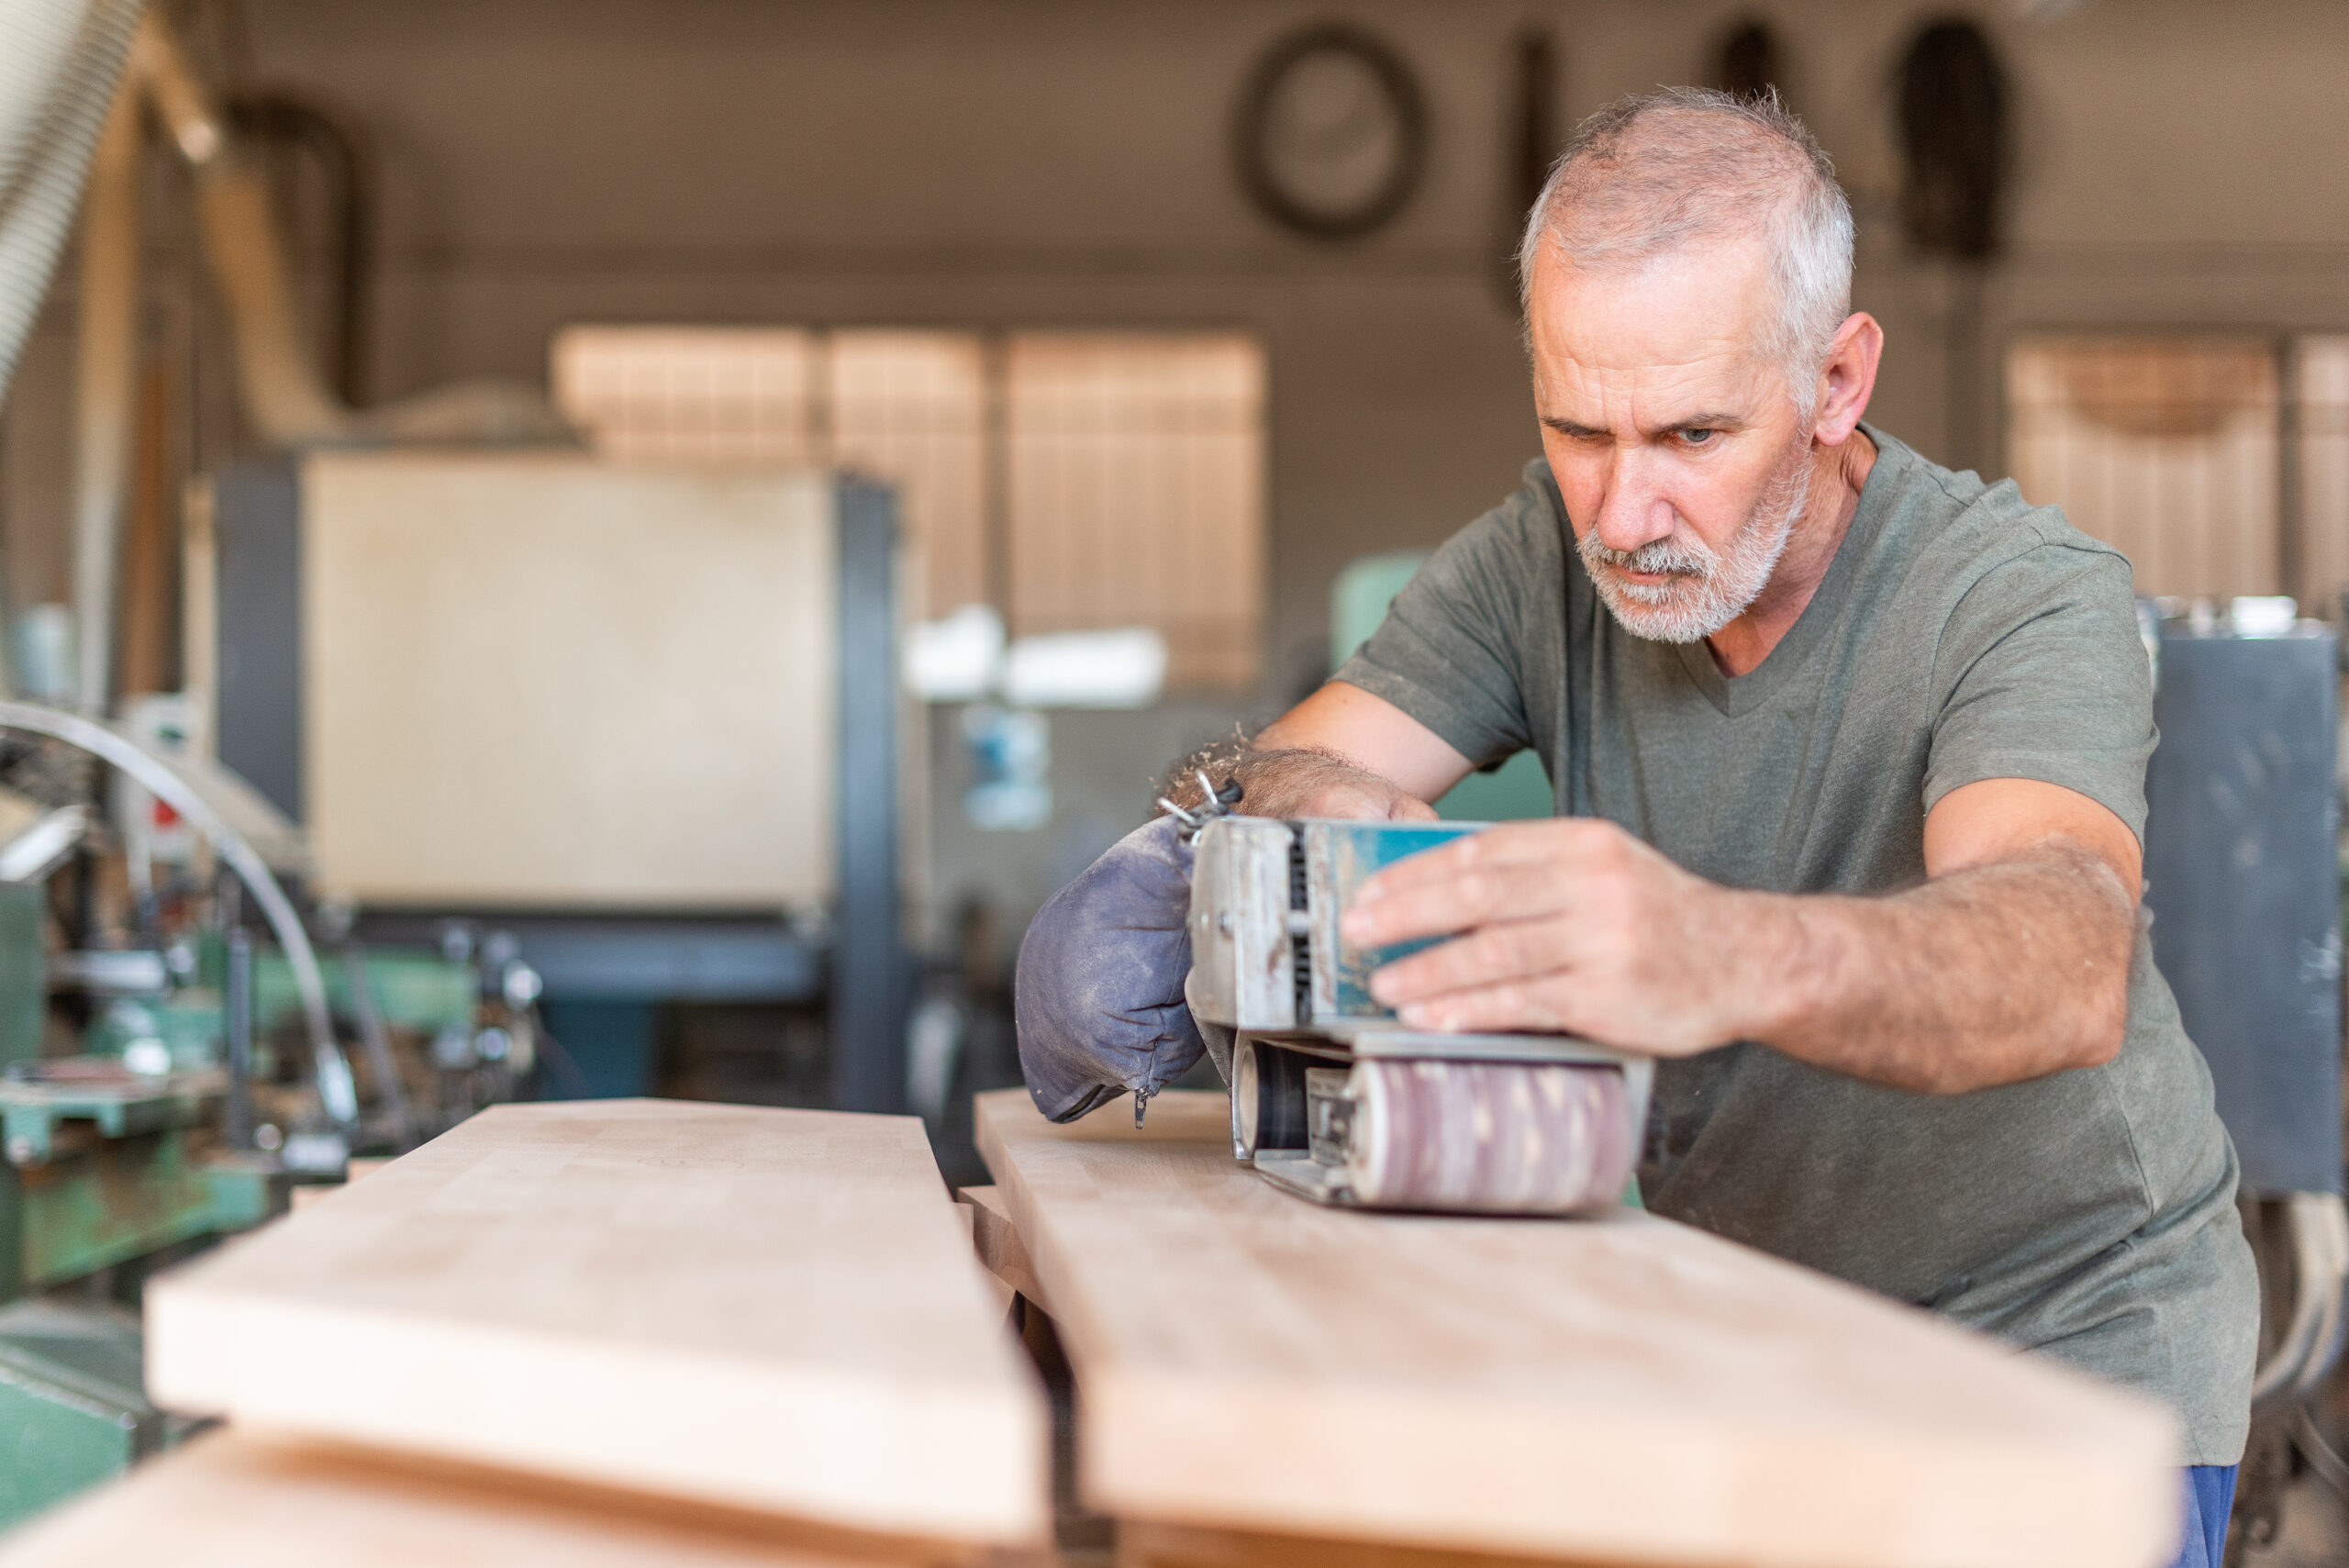 Male person focused working with a hand sander polishing a wooden board